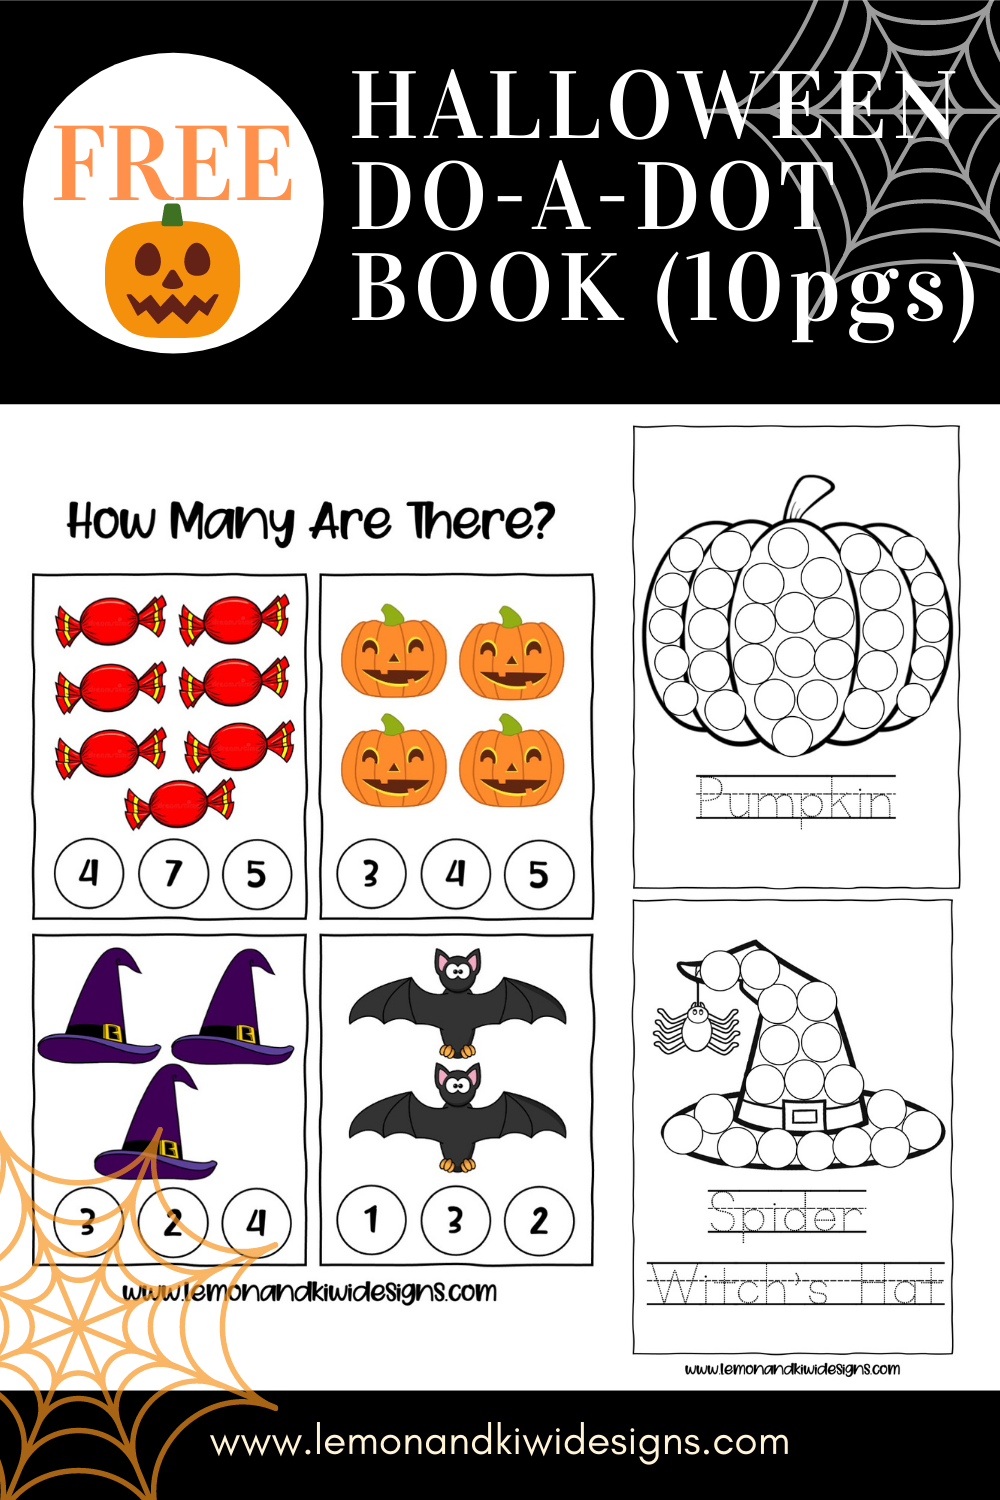 10 Halloween Do-A-Dot Printables (Free Activity Book for Kids)